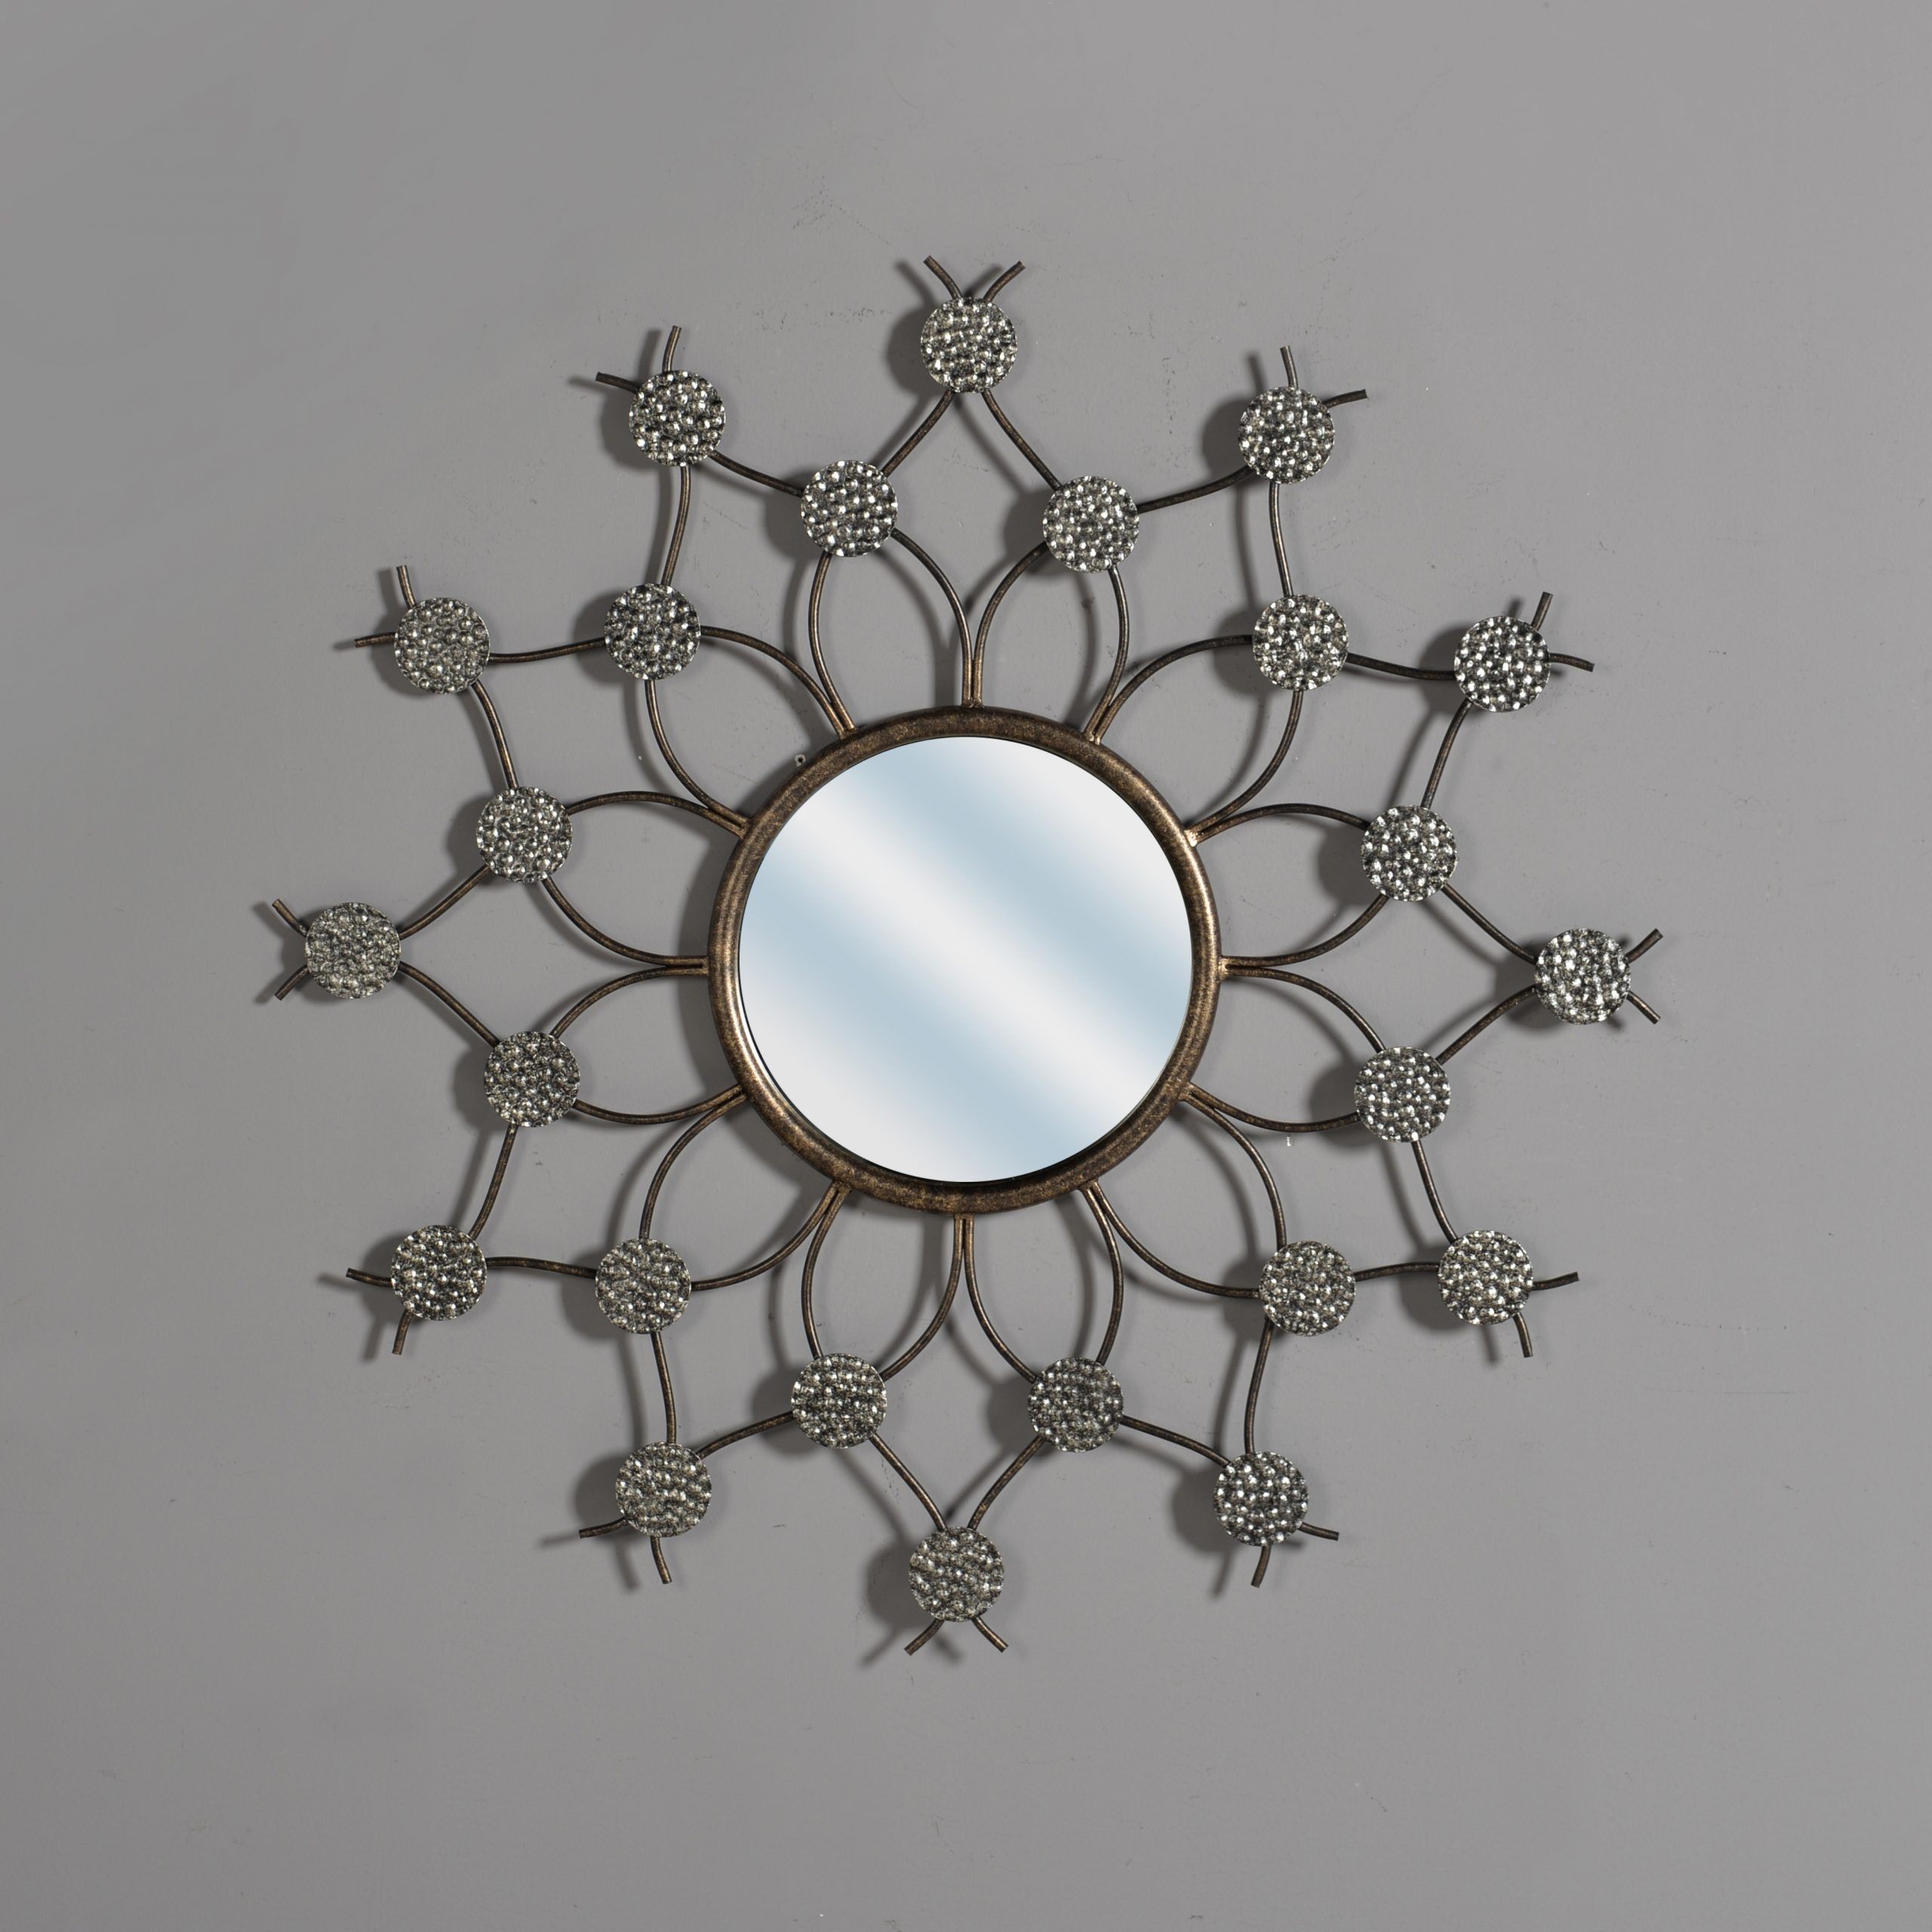 Mayco Antique Sunburst Metal Frame Decorative Wall Mirror With Brass Pertaining To Brass Sunburst Wall Mirrors (View 6 of 15)